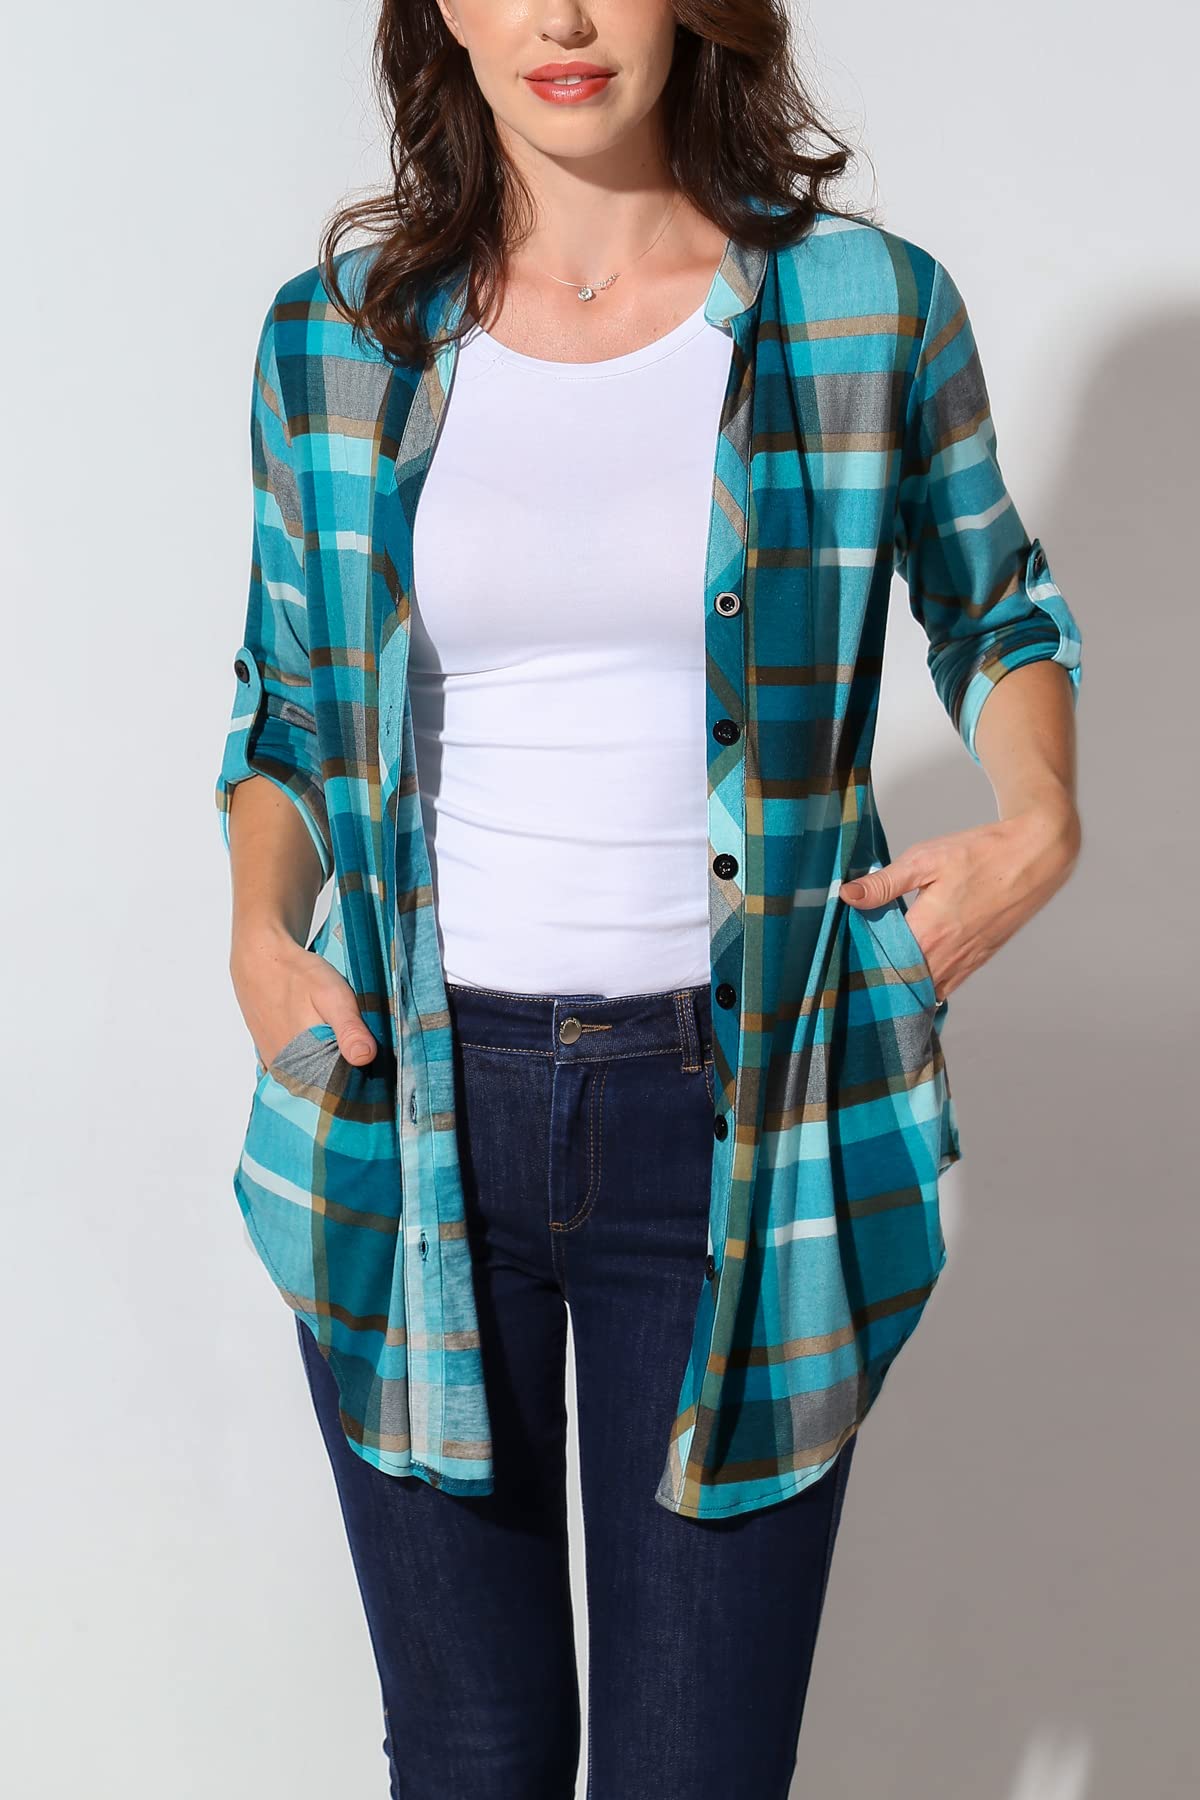 DJT Ocean Depths Women's Soft Knitted Roll Up 3/4 Sleeve Pockets Casual Button Down Plaid Shirts